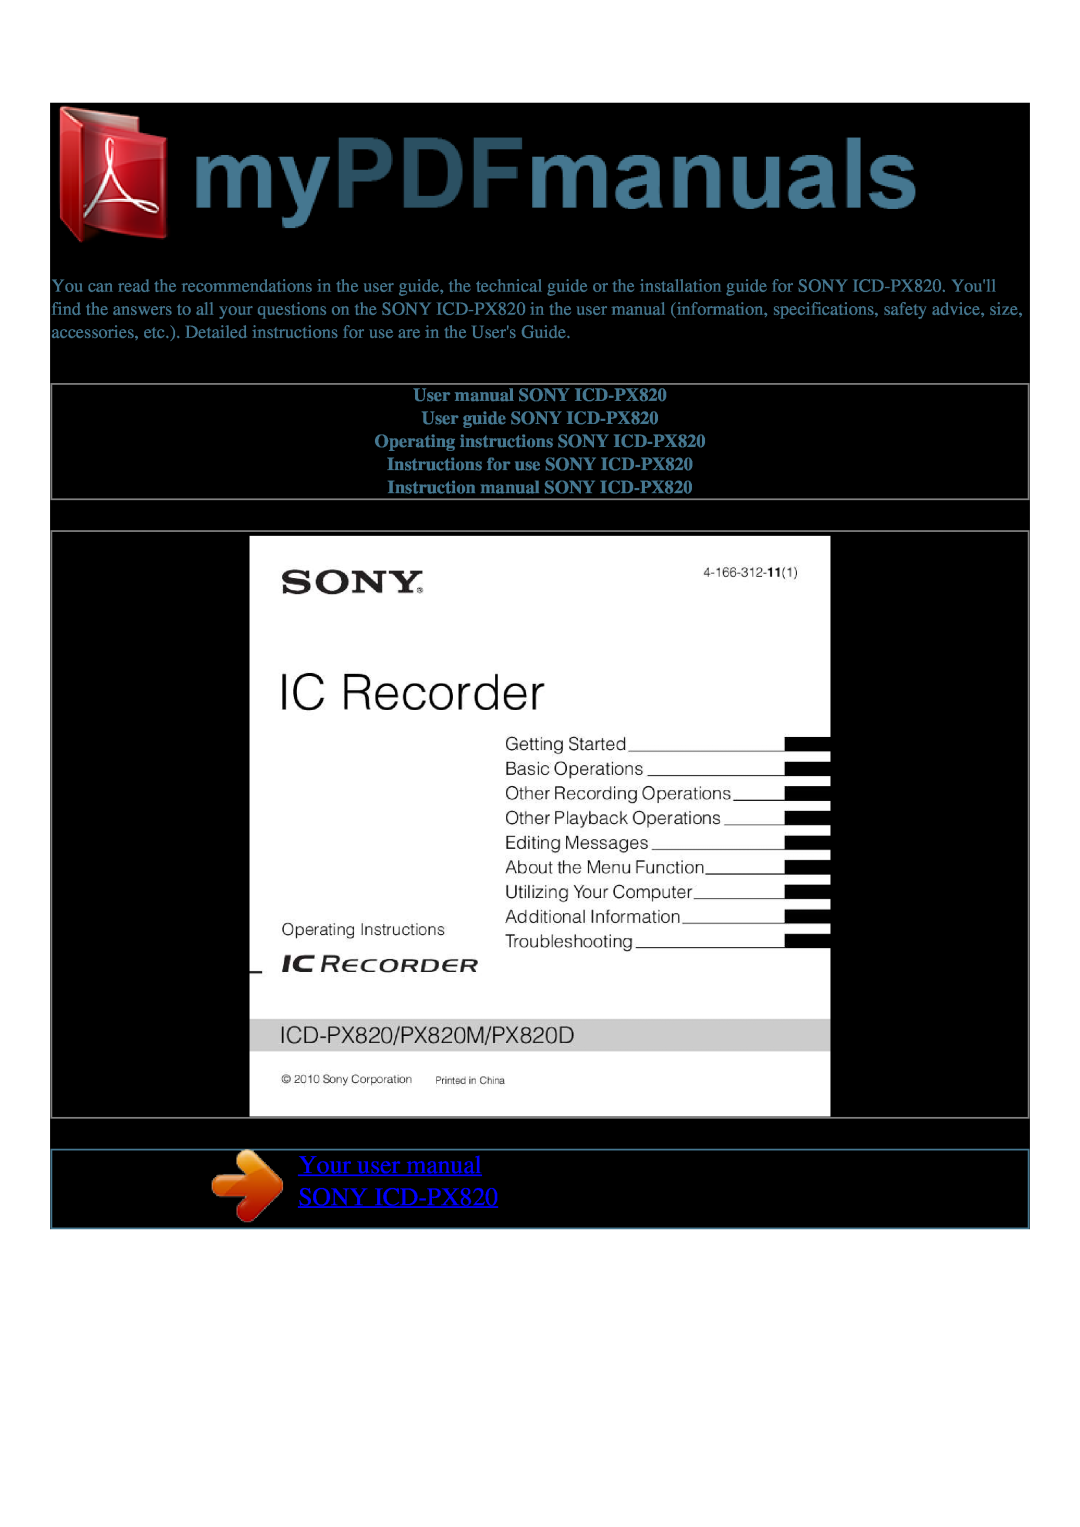 Sony PX820D, PX820M user manual Your user manual SONY ICD-PX820, User manual SONY ICD-PX820 User guide SONY ICD-PX820 